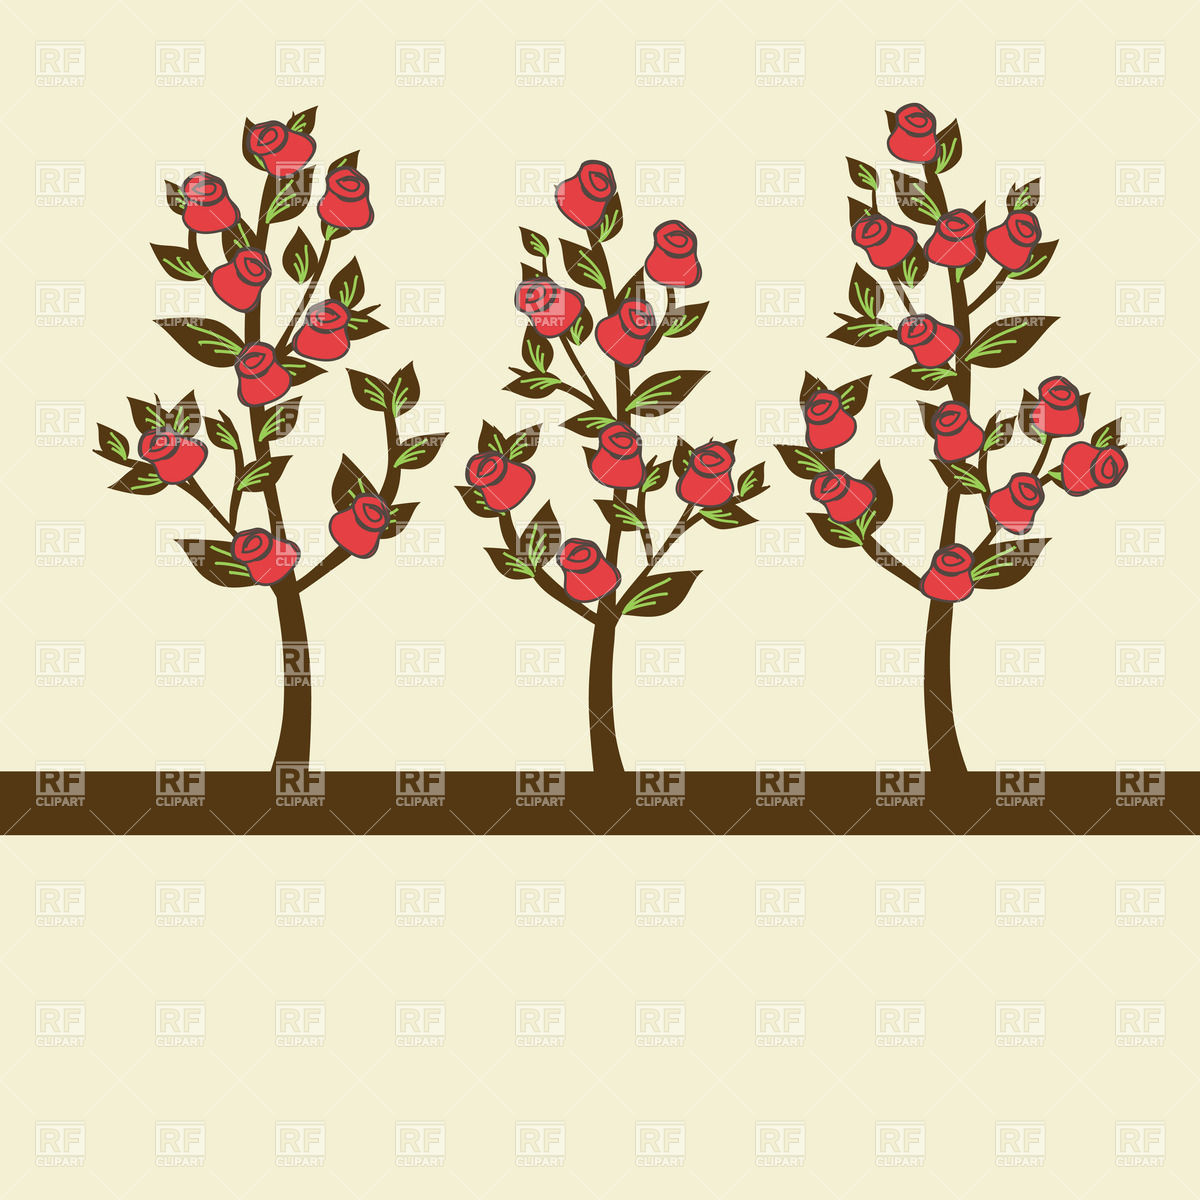 Bush Of Rose 23151 Plants And Animals Download Royalty Free Vector